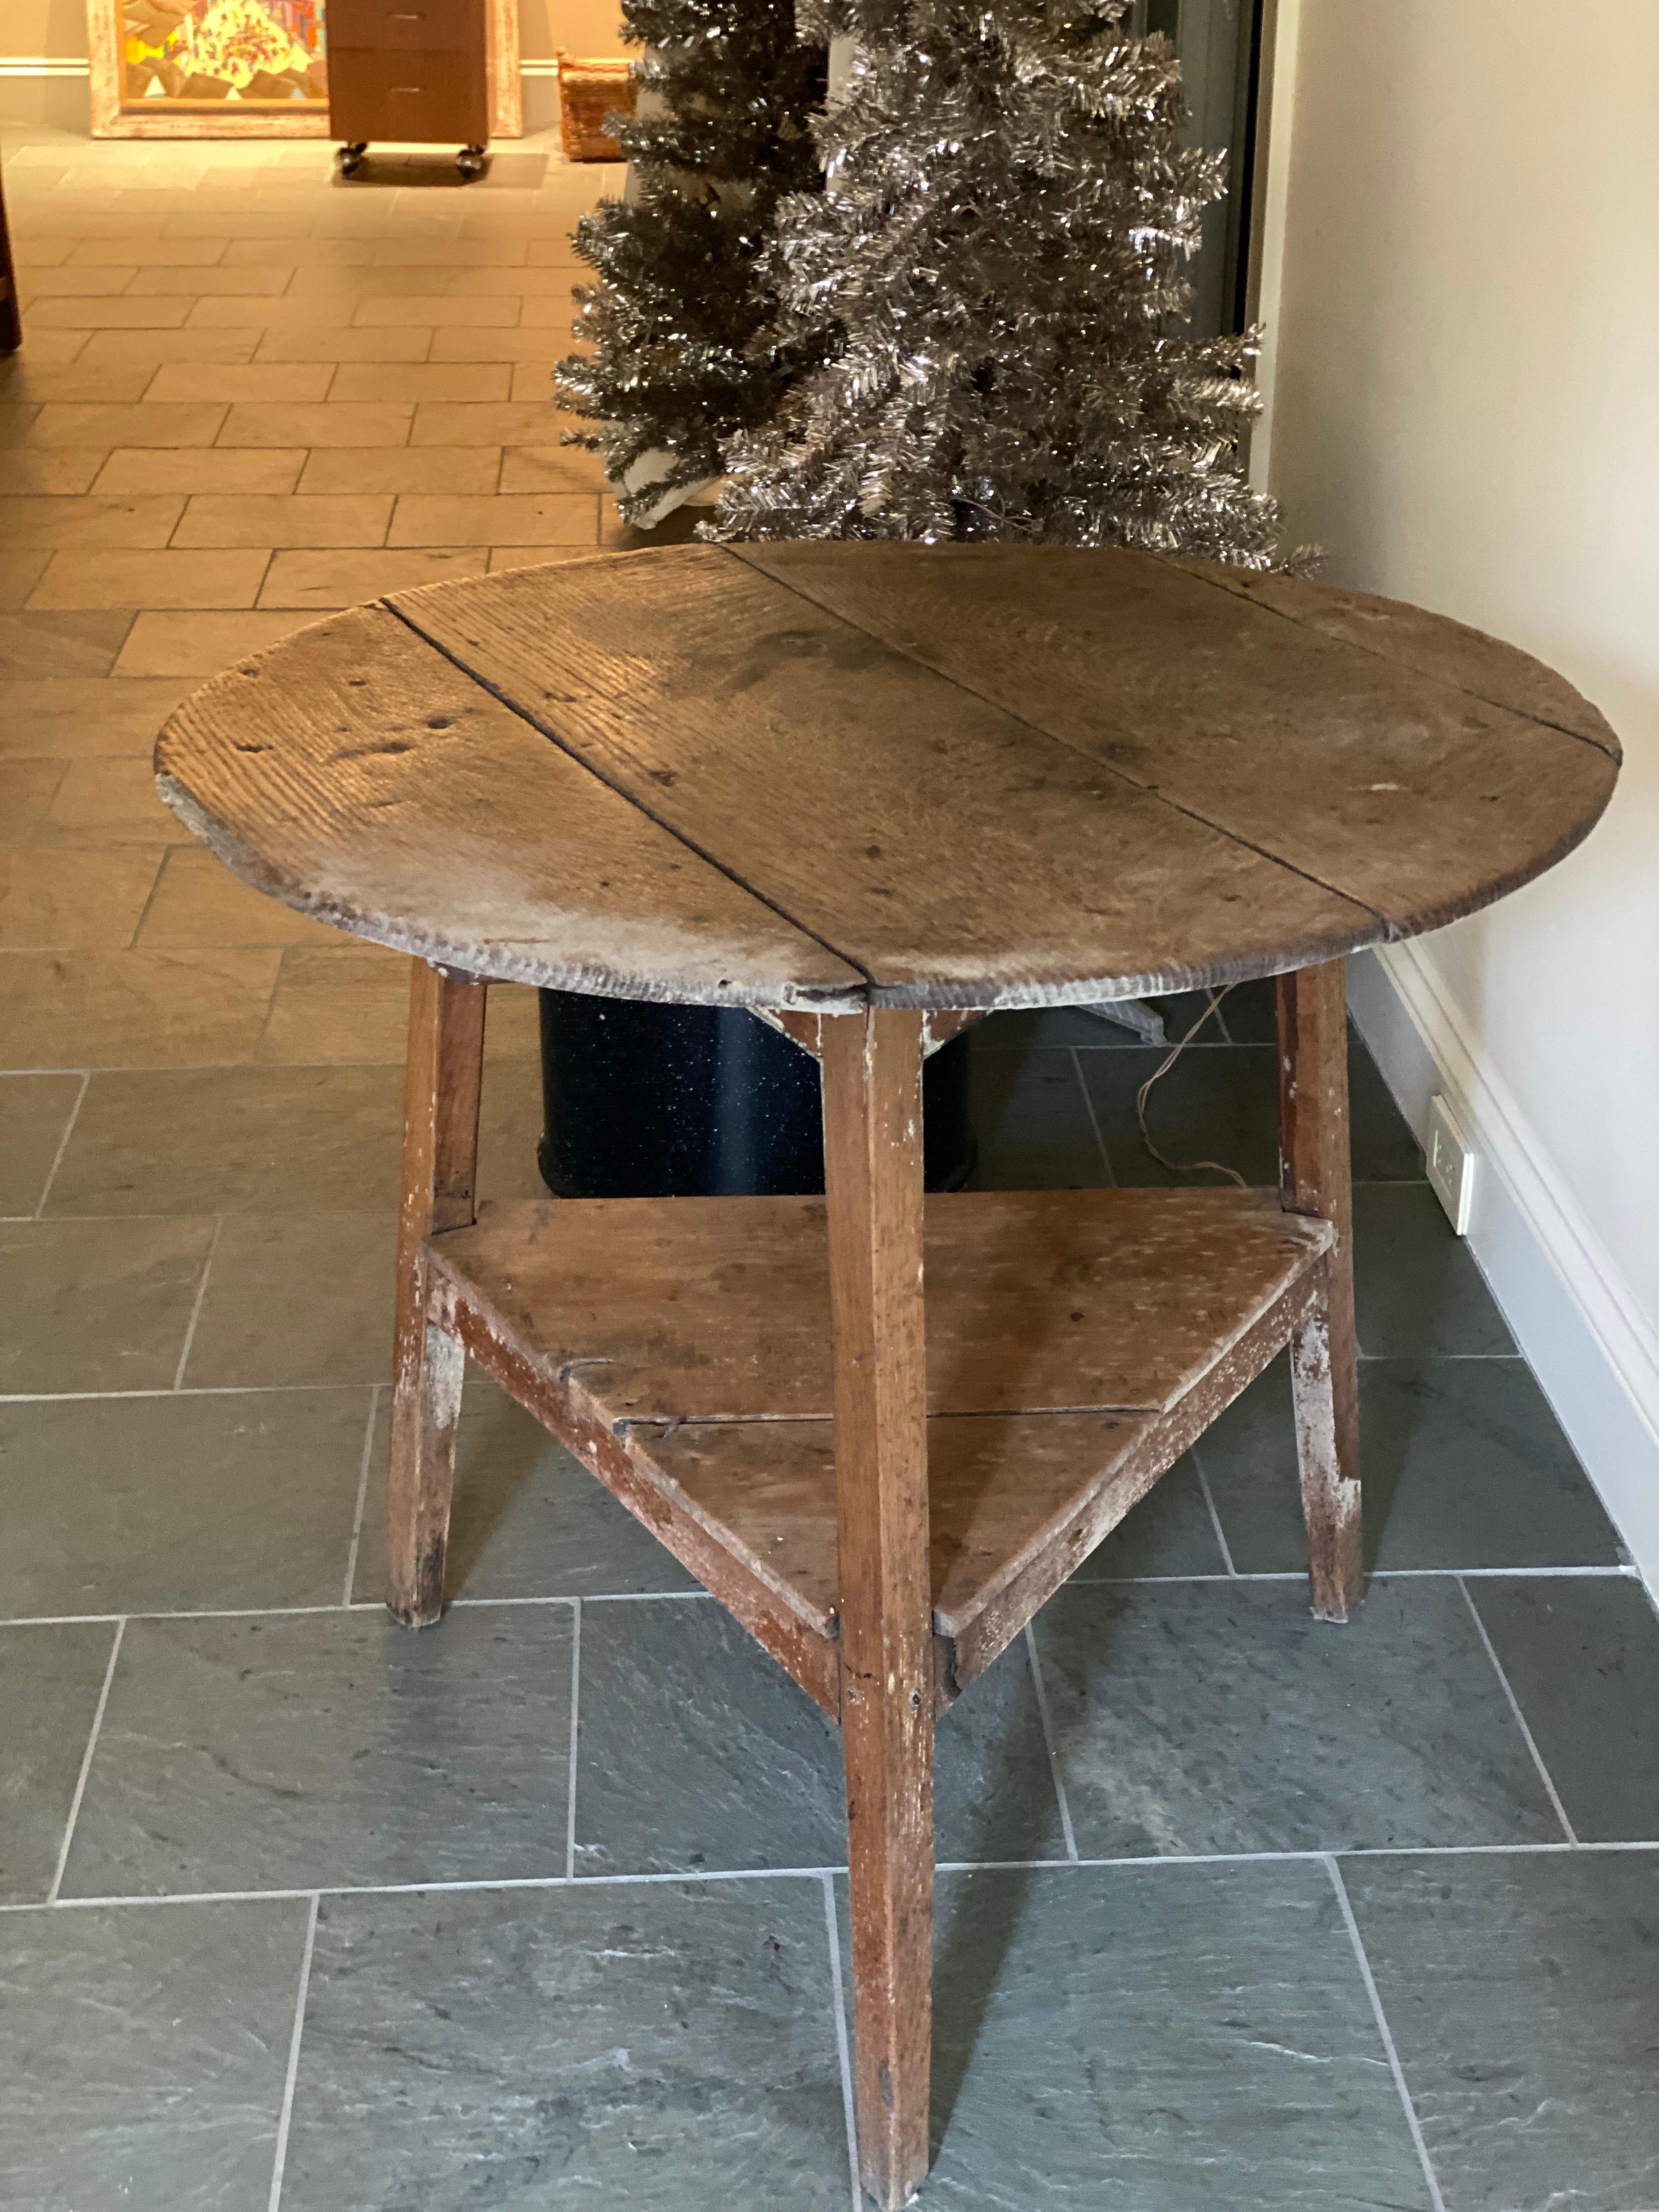 19th century English pine cricket table
Great aged overall patina

Measures: 30 3/8